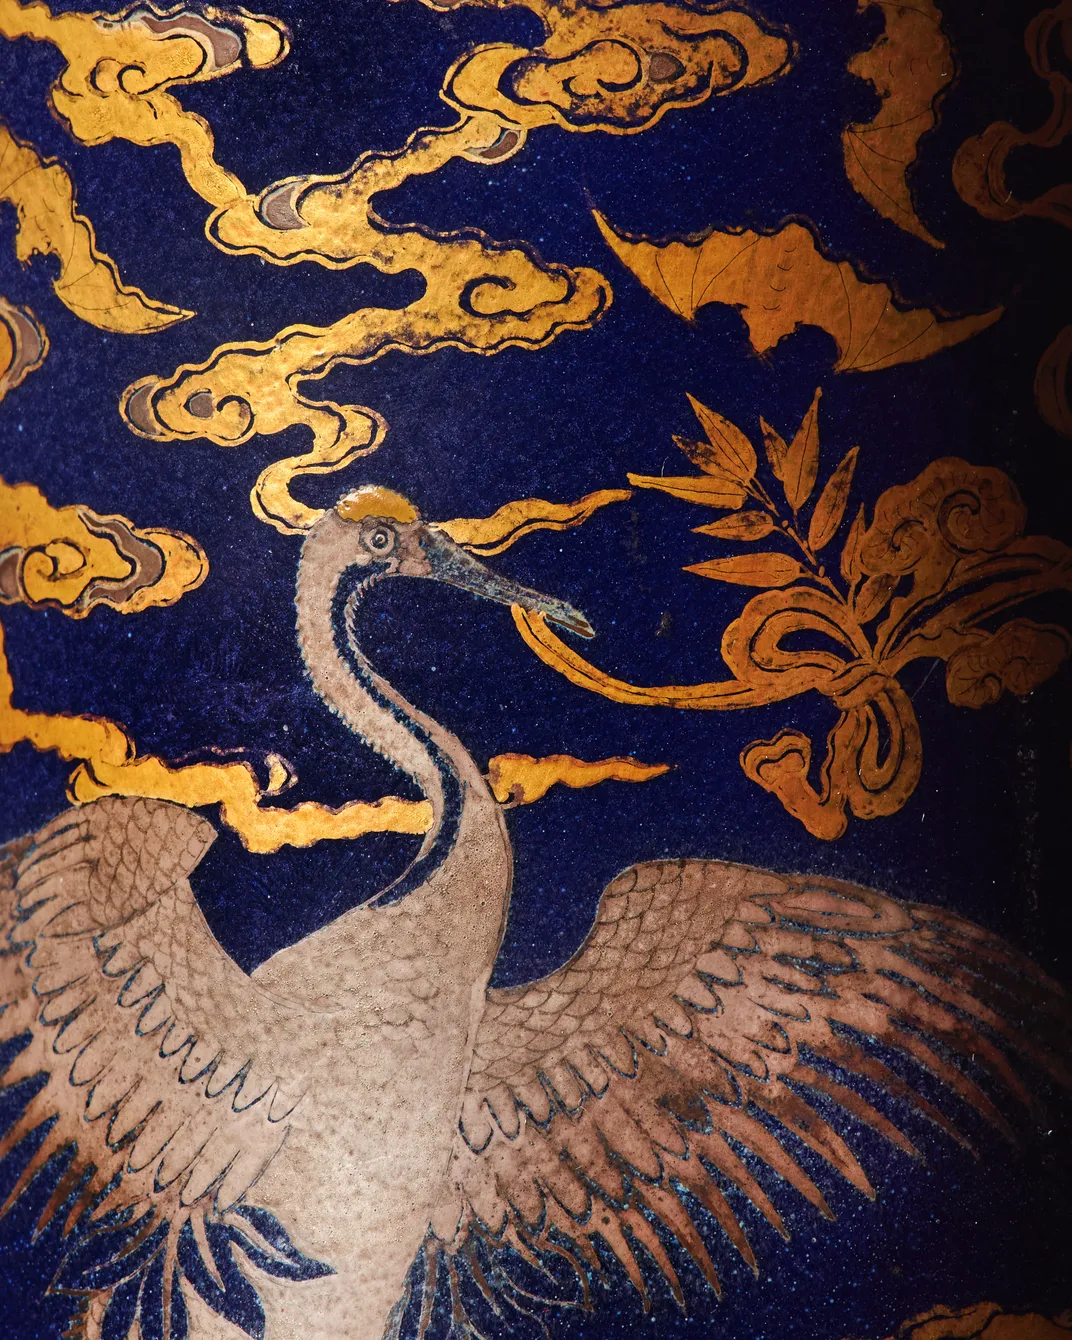 Detail shot of the vase showing a crane and clouds